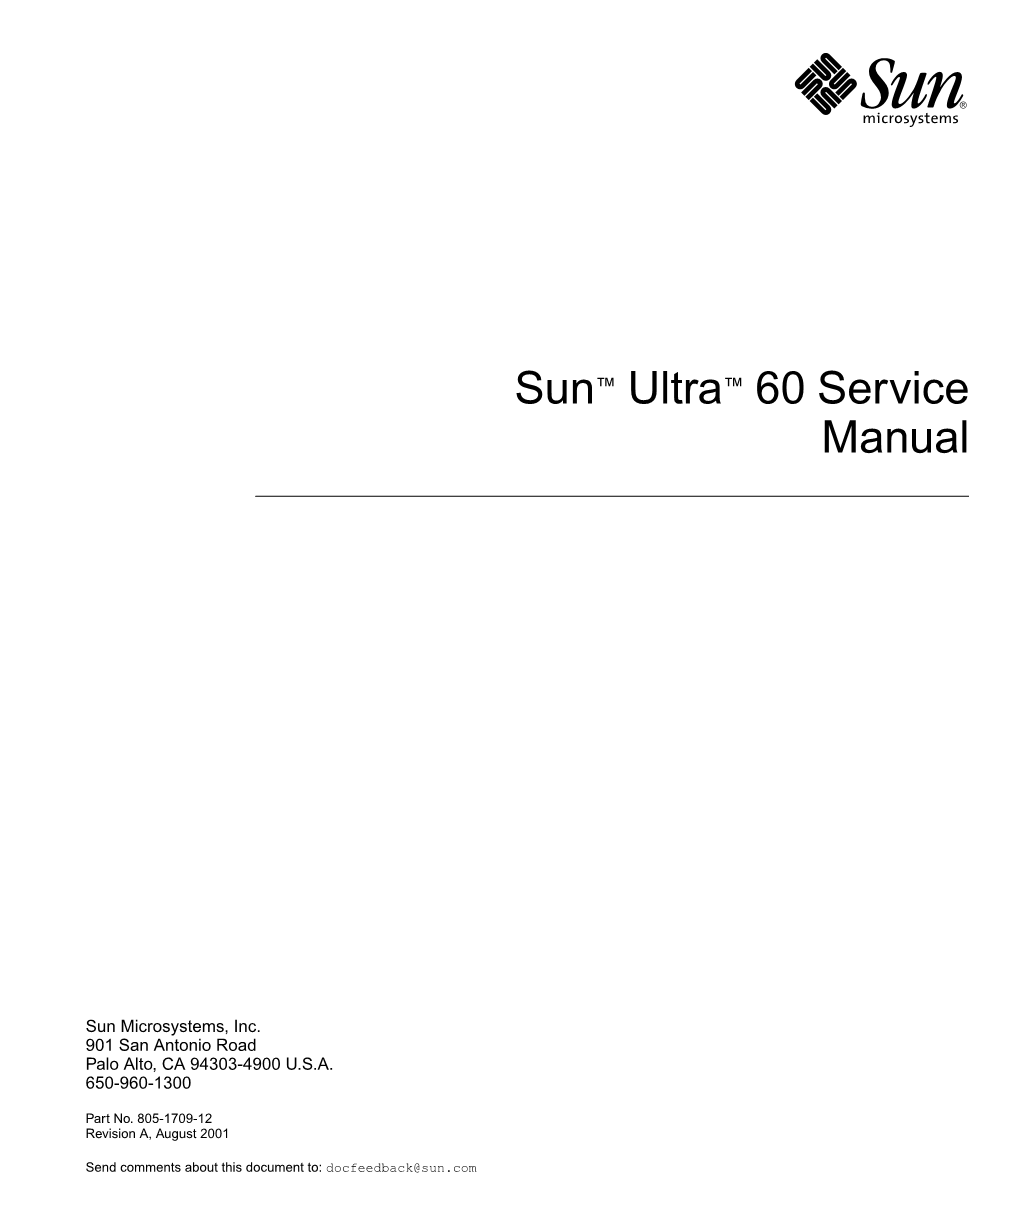 Sun Ultra 60 Service Manual Provides Detailed Procedures That Describe the Removal and Replacement of Replaceable Parts in the Ultra™ 60 Computer (System Unit)